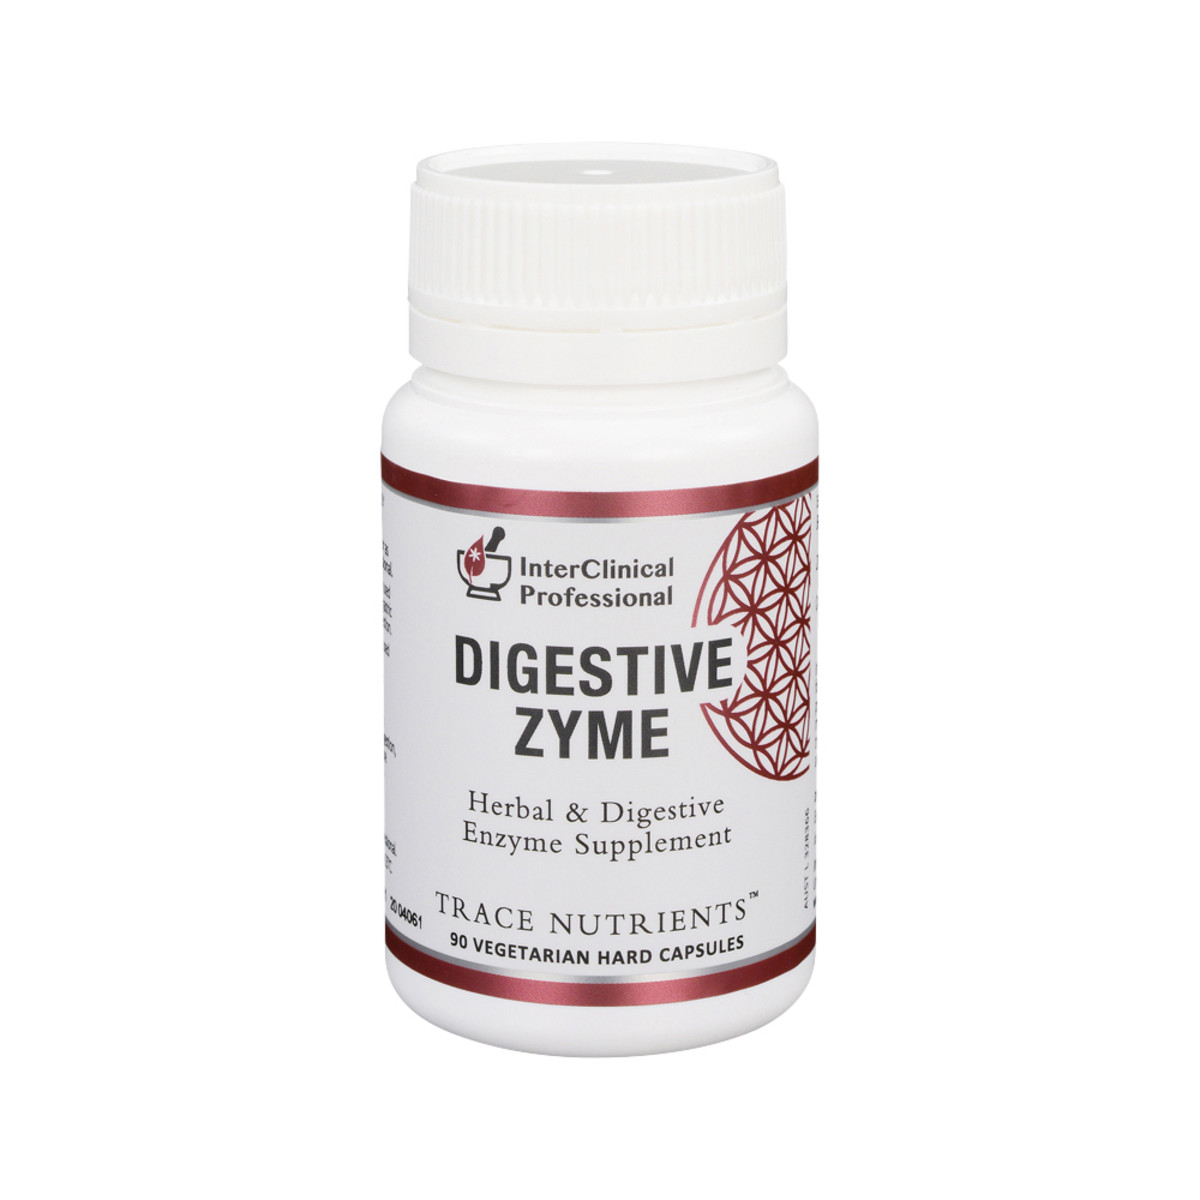 ICL PROFESSIONALS - Digestive Zyme